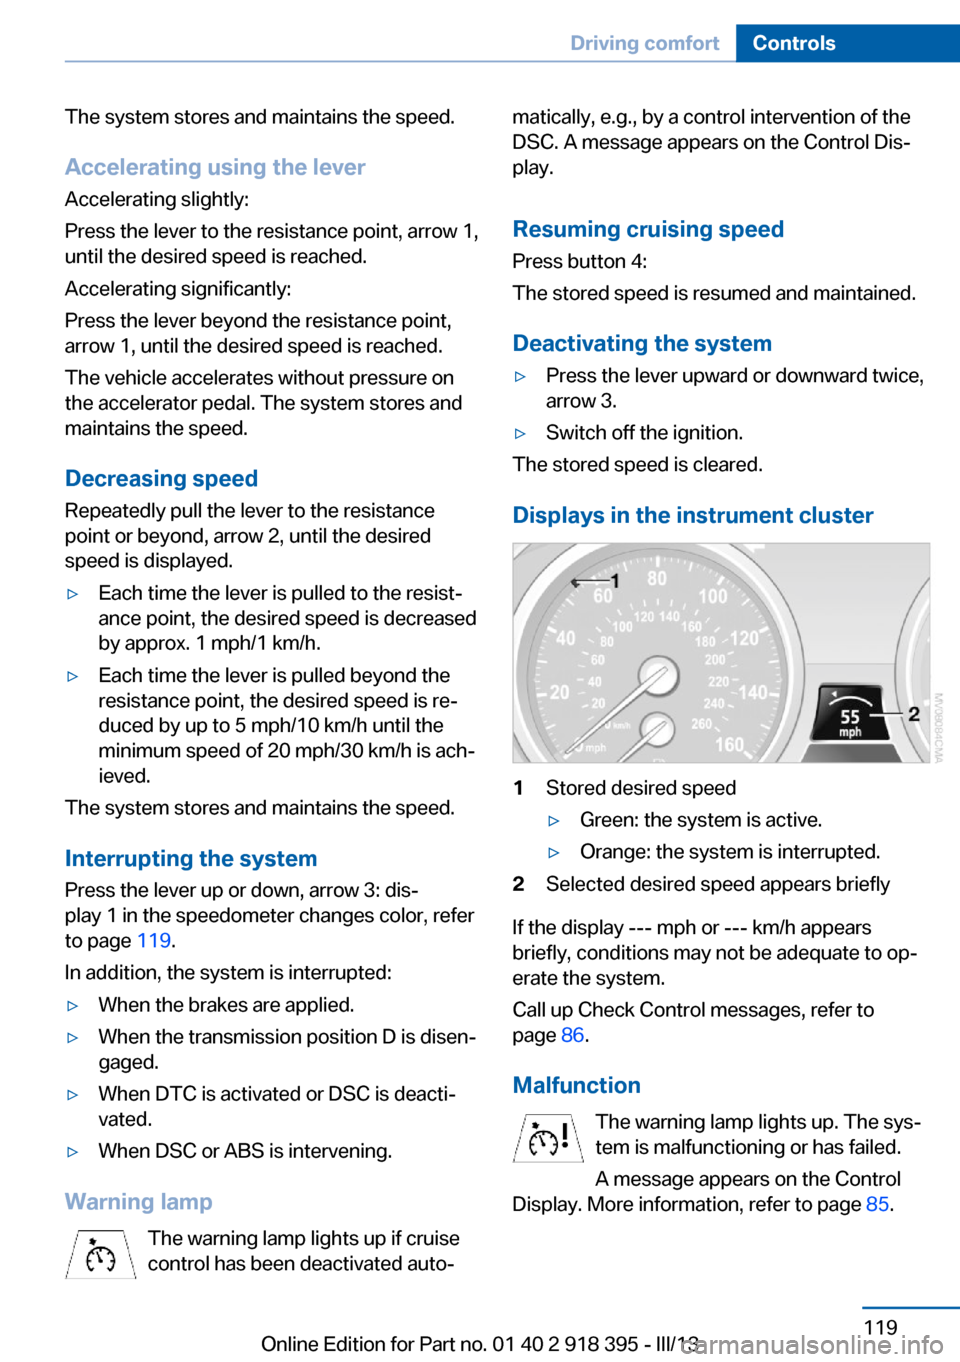 BMW X5 2013 E70 Owners Manual The system stores and maintains the speed.
Accelerating using the lever Accelerating slightly:
Press the lever to the resistance point, arrow 1,
until the desired speed is reached.
Accelerating signif